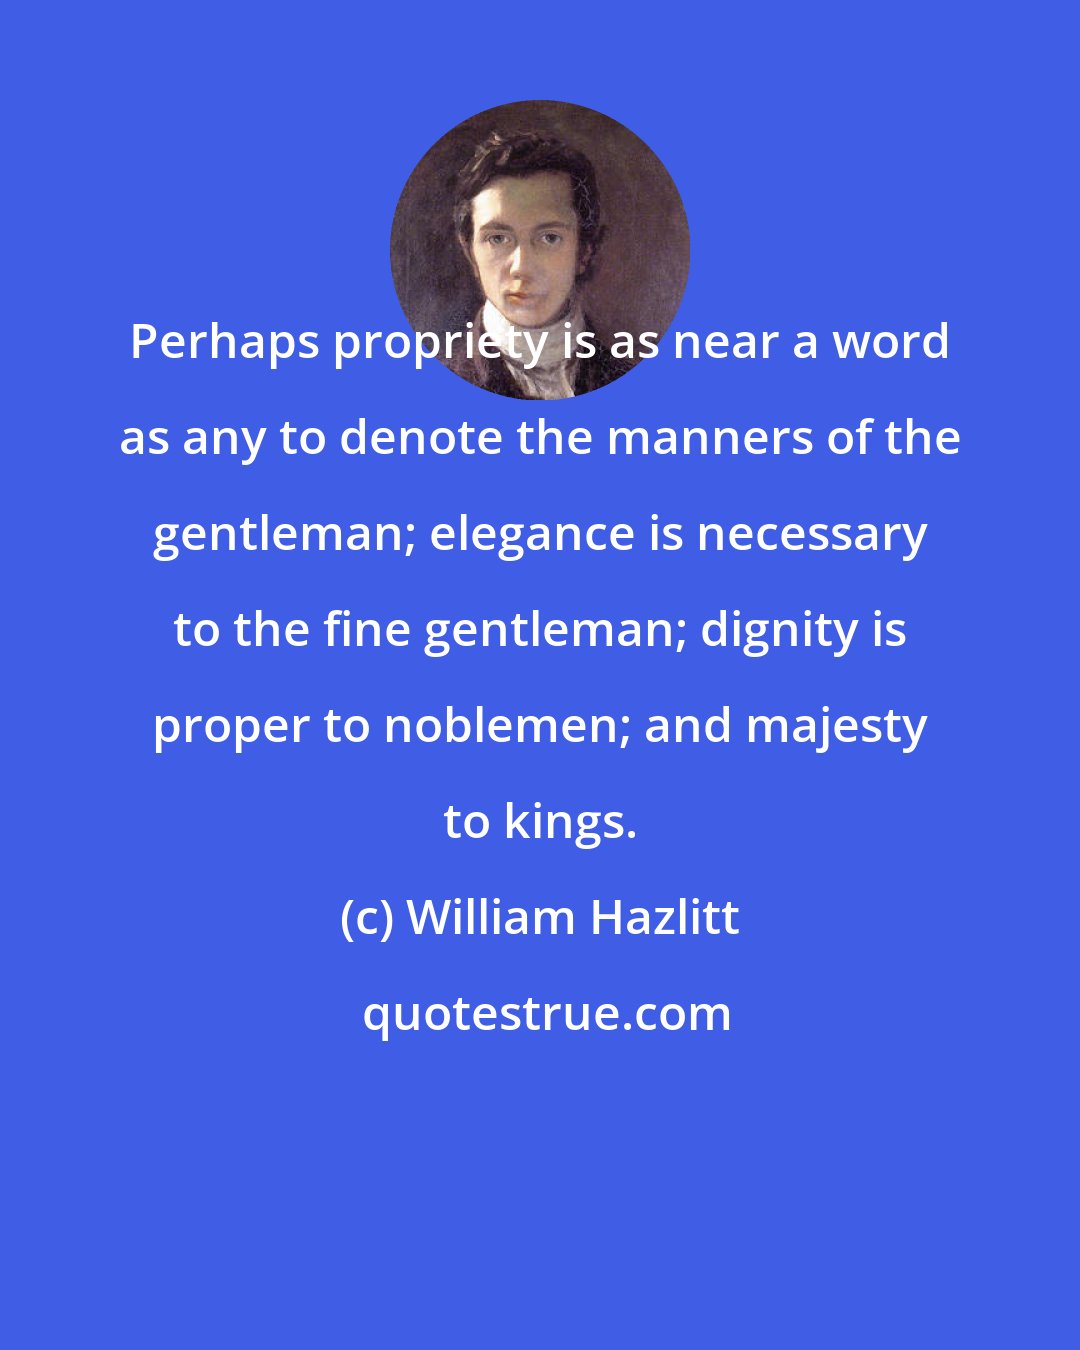 William Hazlitt: Perhaps propriety is as near a word as any to denote the manners of the gentleman; elegance is necessary to the fine gentleman; dignity is proper to noblemen; and majesty to kings.